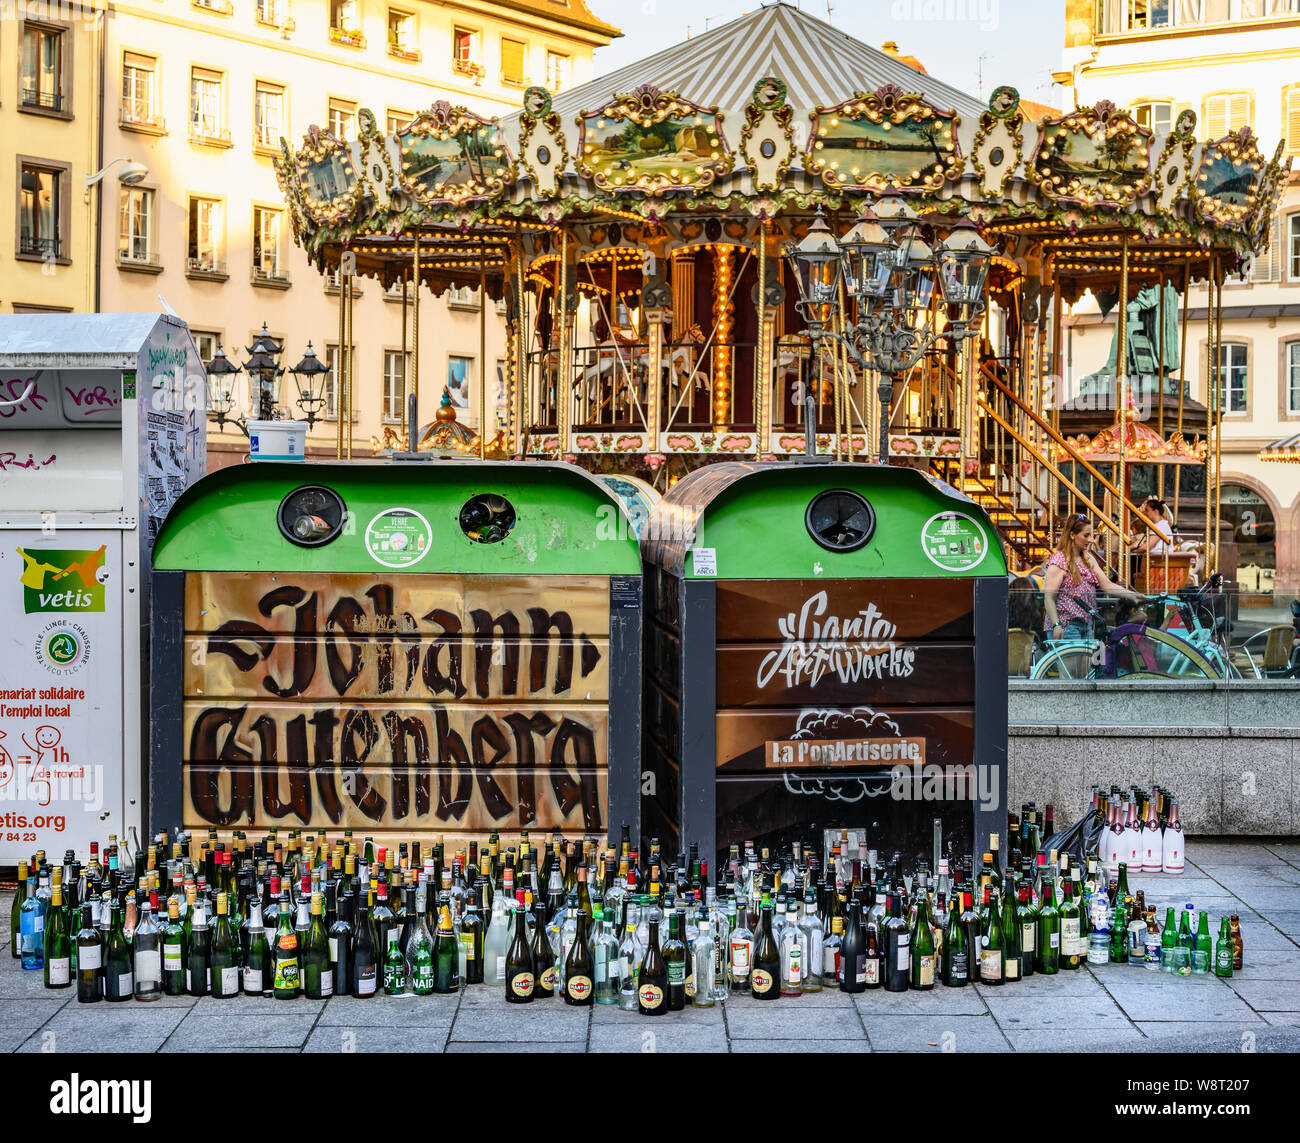 Empty glass bottles dumped in front of overflowing bottle banks, merry-go-round in background, Strasbourg, Alsace, France, Europe, Stock Photo